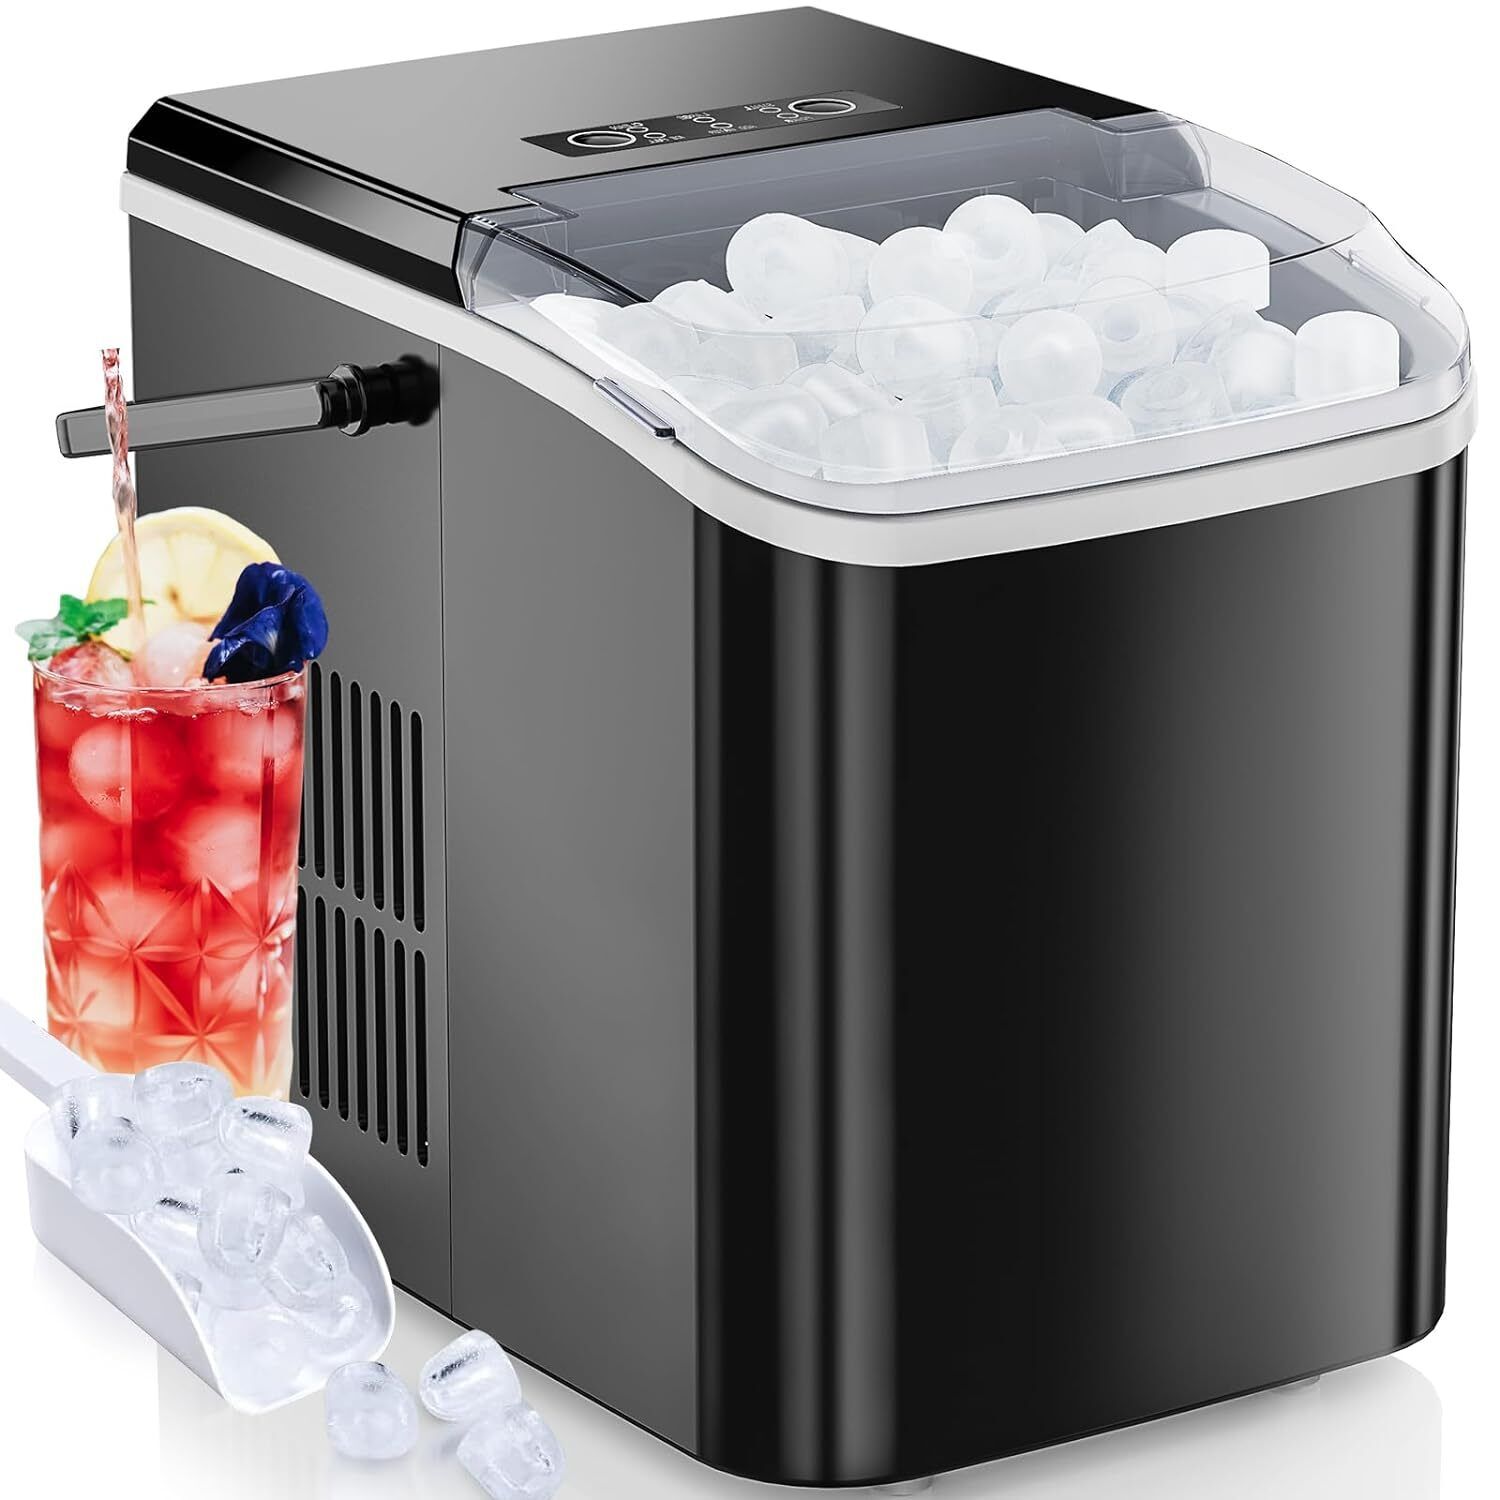 Countertop Ice Maker, Portable Ice Machine Self-Cleaning, 9 Cubes in 6 Mins